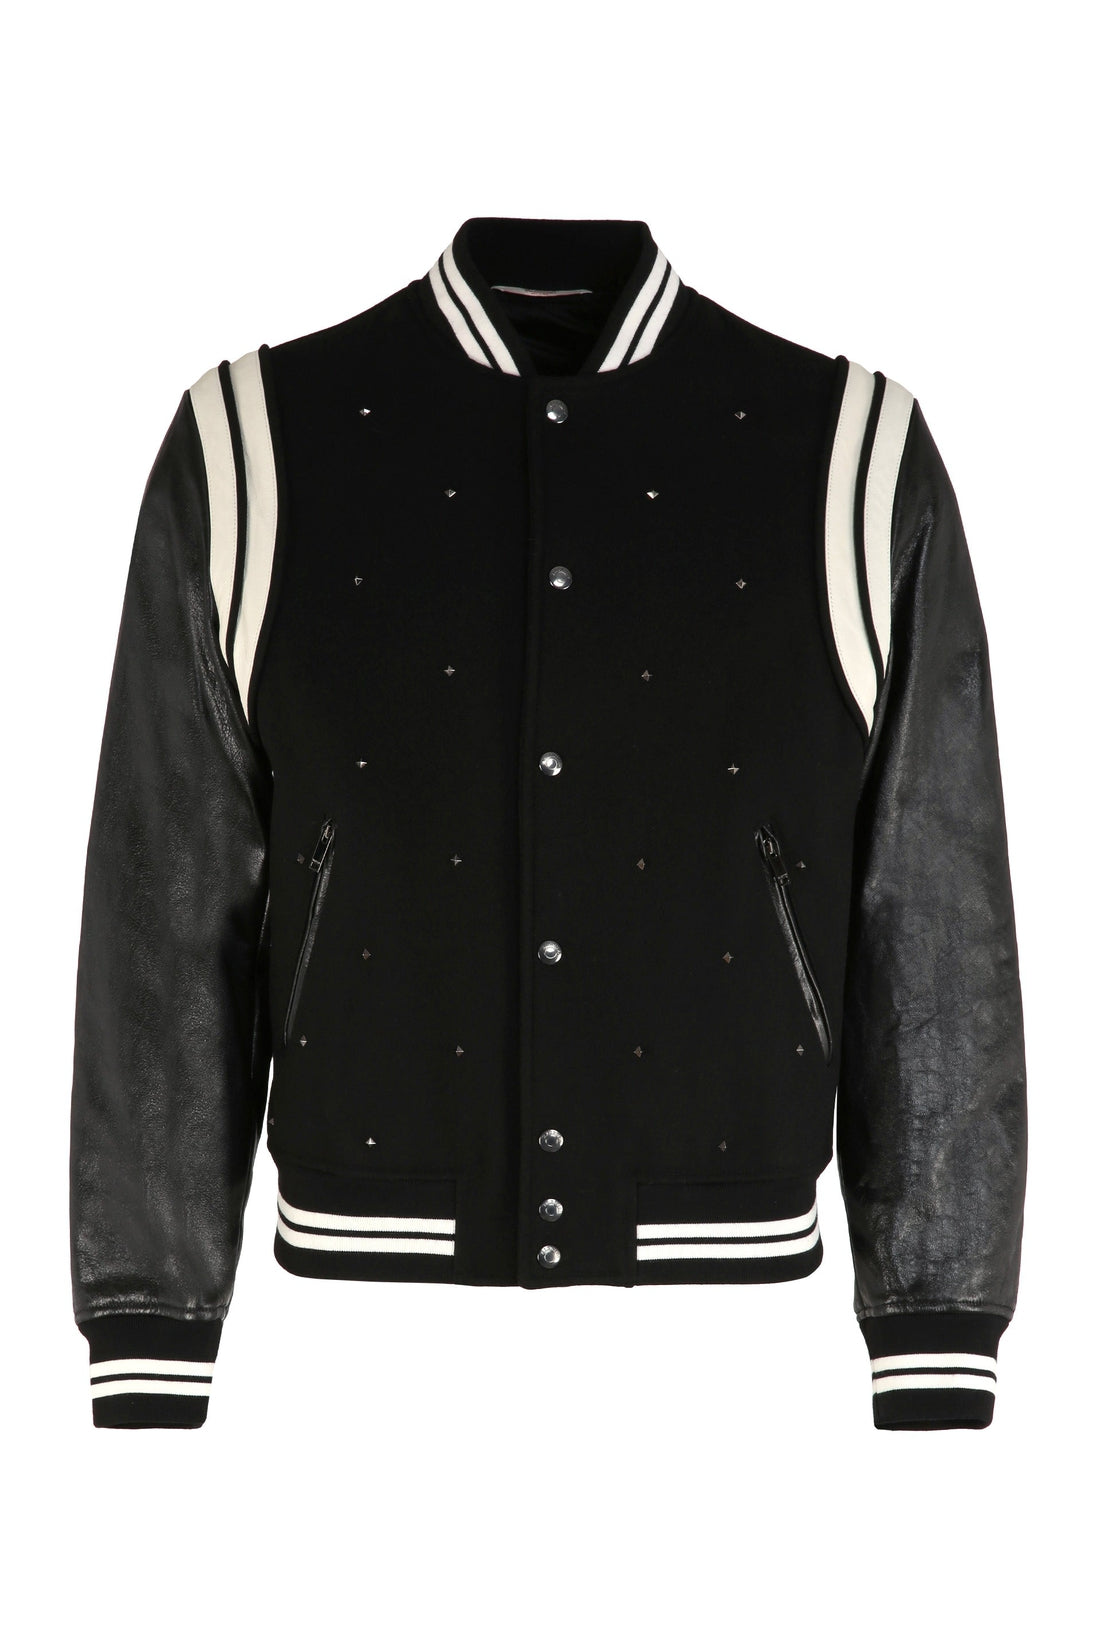 Valentino-OUTLET-SALE-Wool and leather bomber jacket-ARCHIVIST